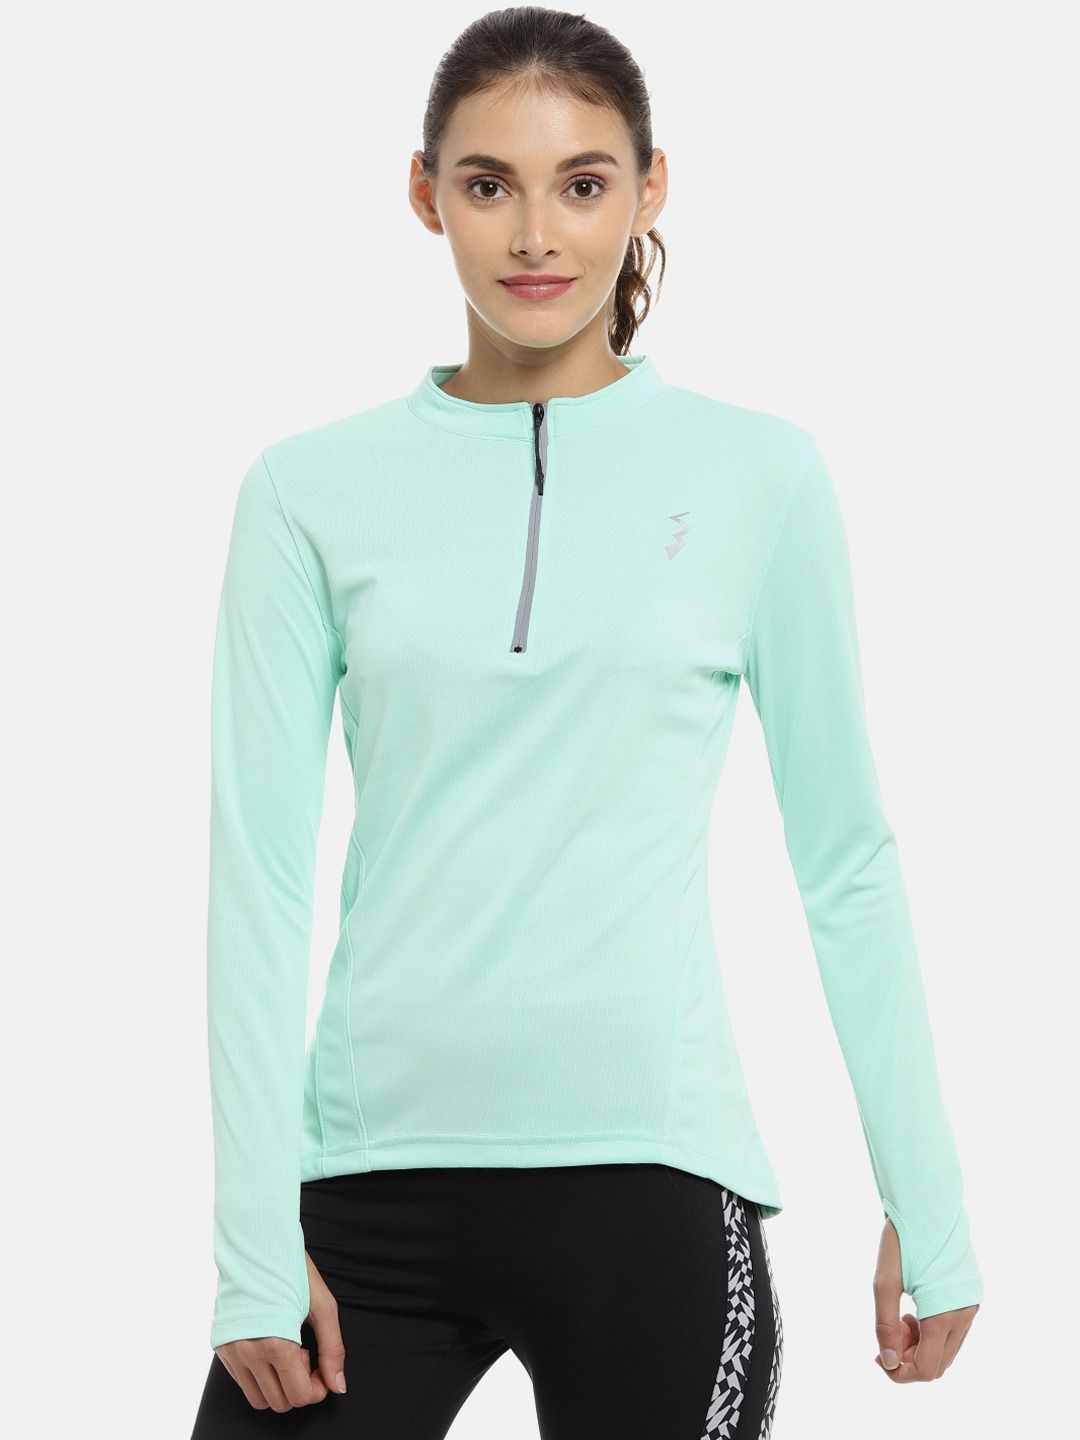 Campus Sutra Women Sea Green Henley Neck Running T-shirt Price in India